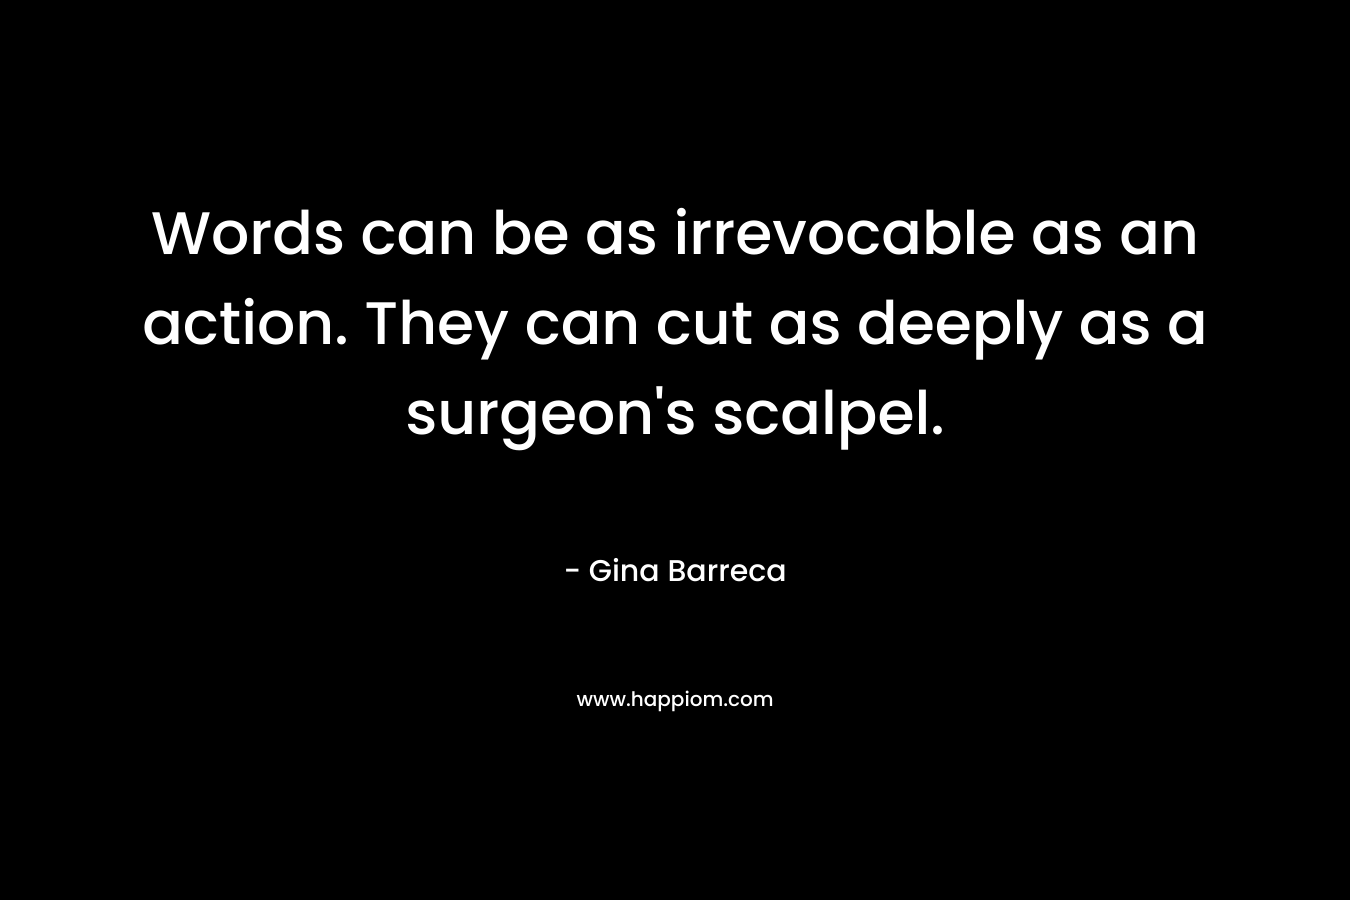 Words can be as irrevocable as an action. They can cut as deeply as a surgeon’s scalpel. – Gina Barreca